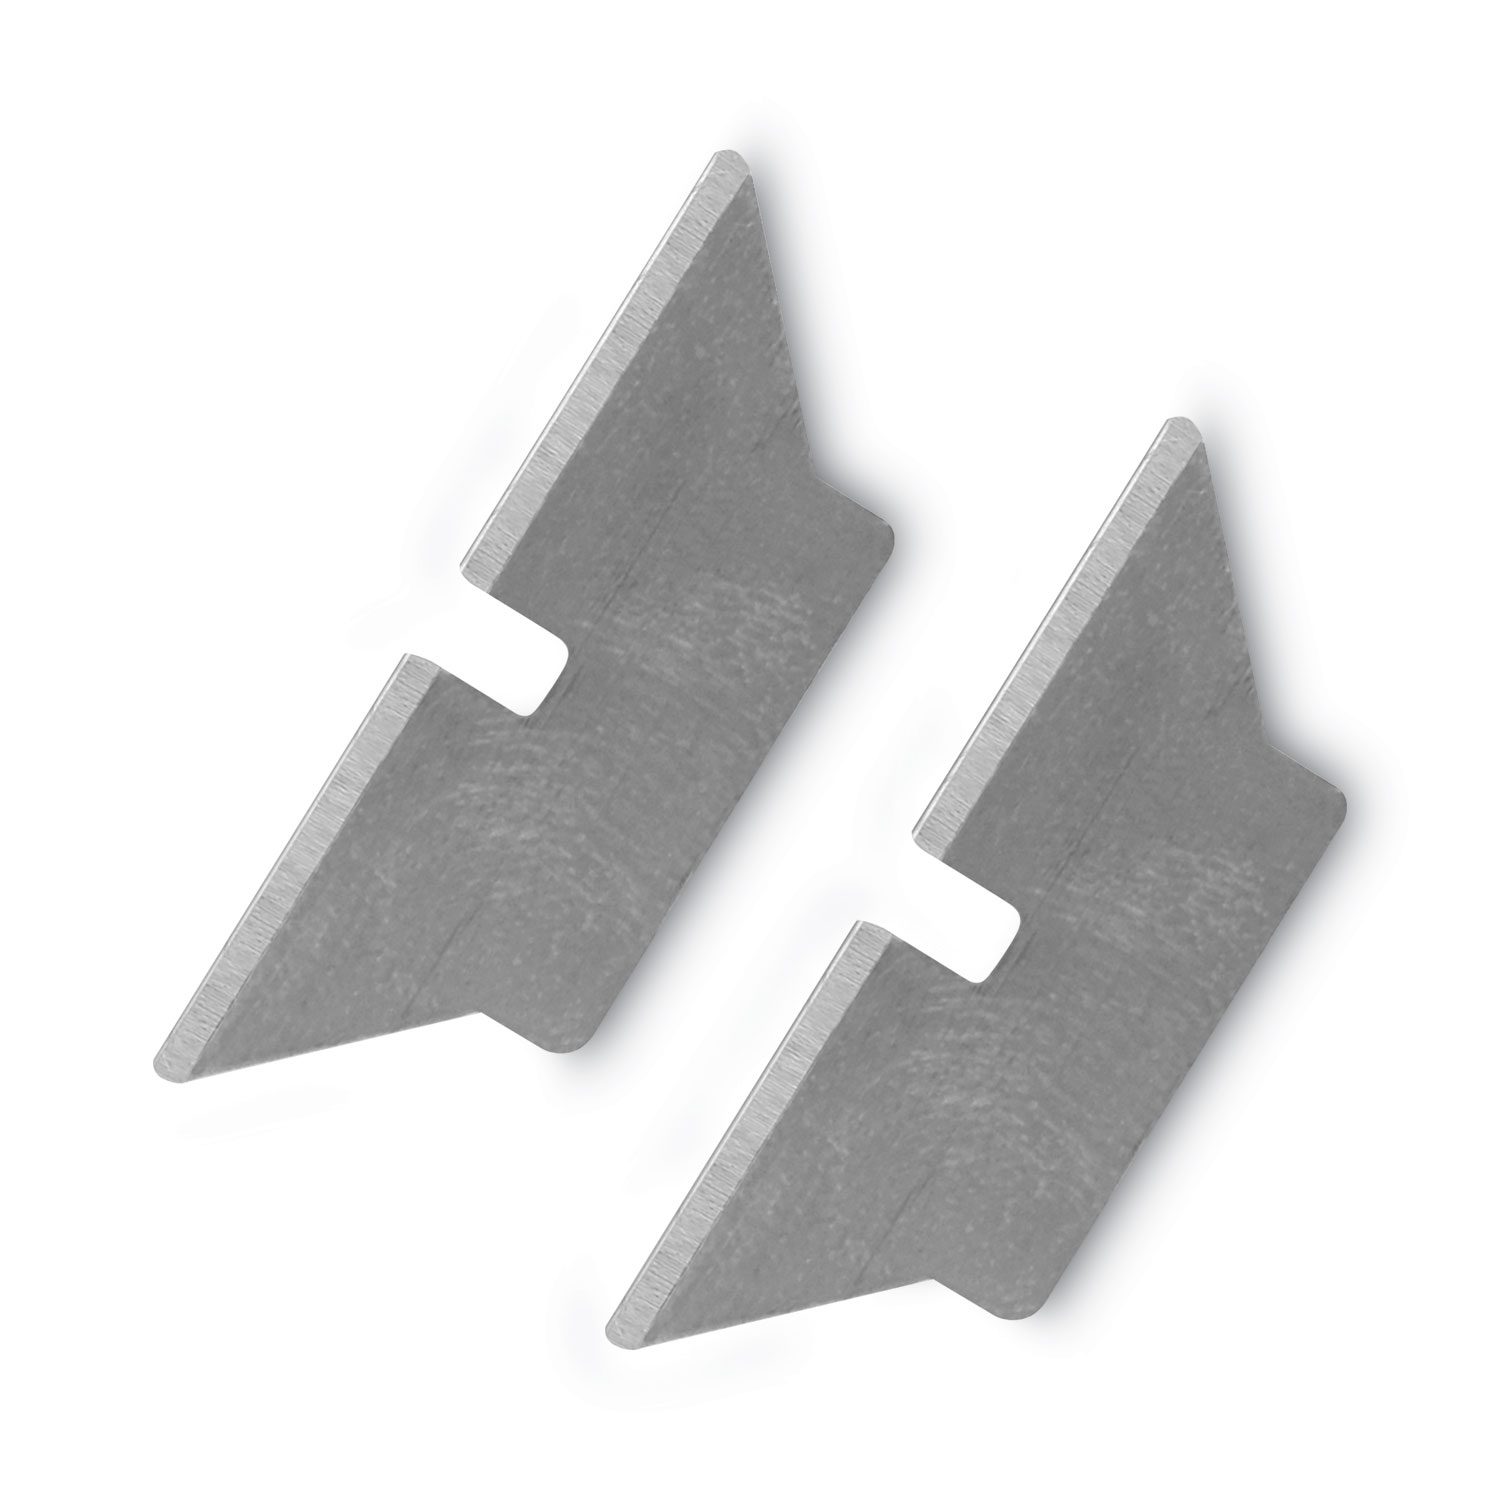 10/Pack COSCO Easycut Self Retracting Cutter Blades COS091509 PK 